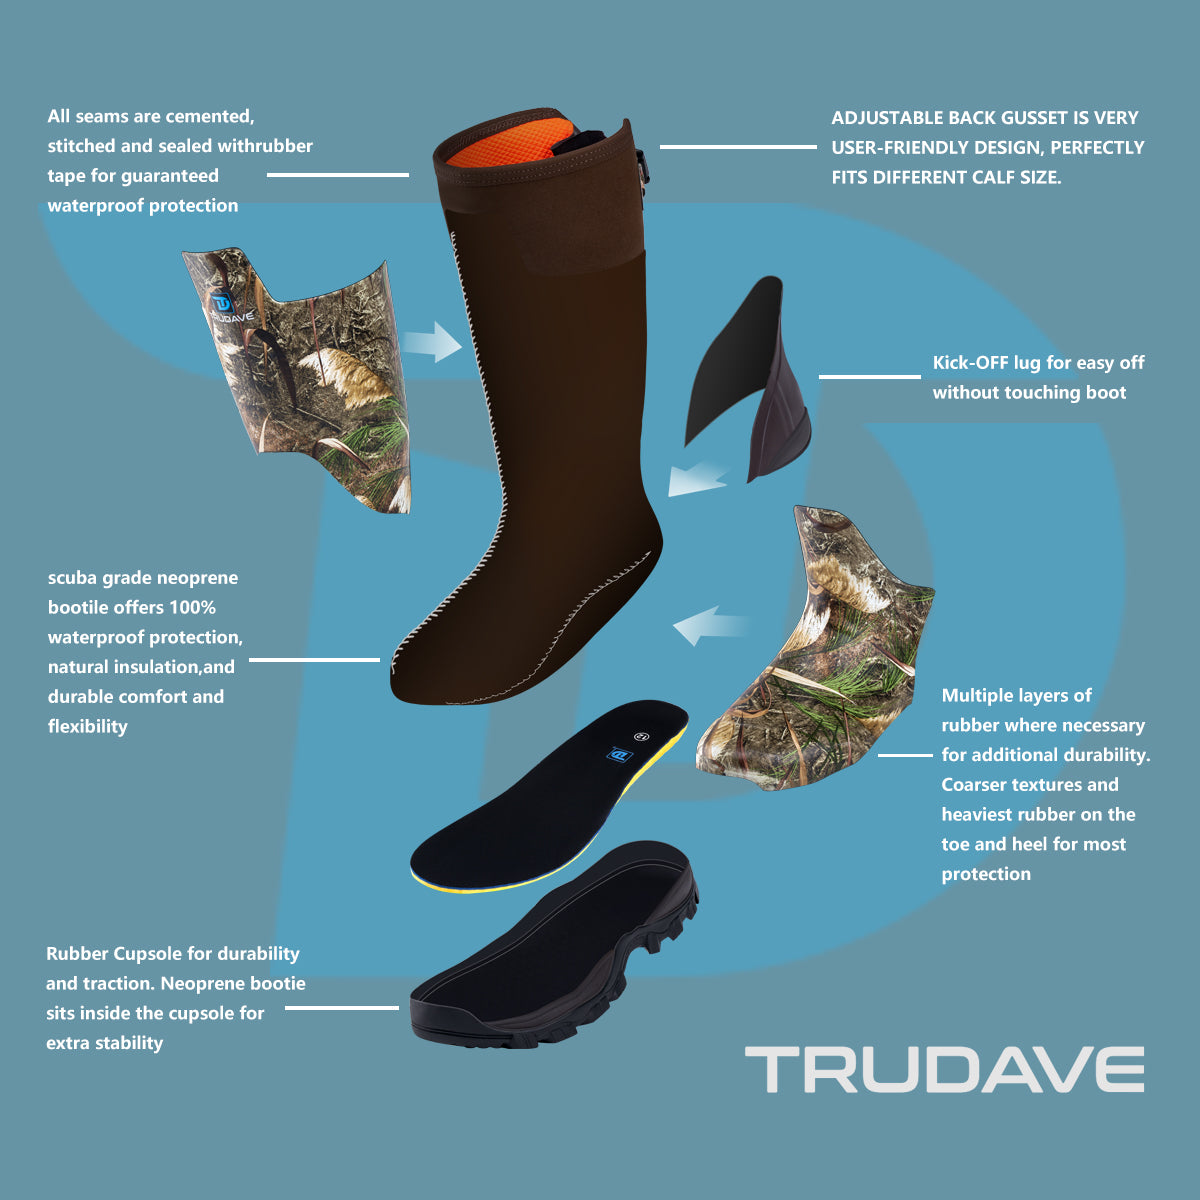 Trudave_boots_structure-iPhone.jpg